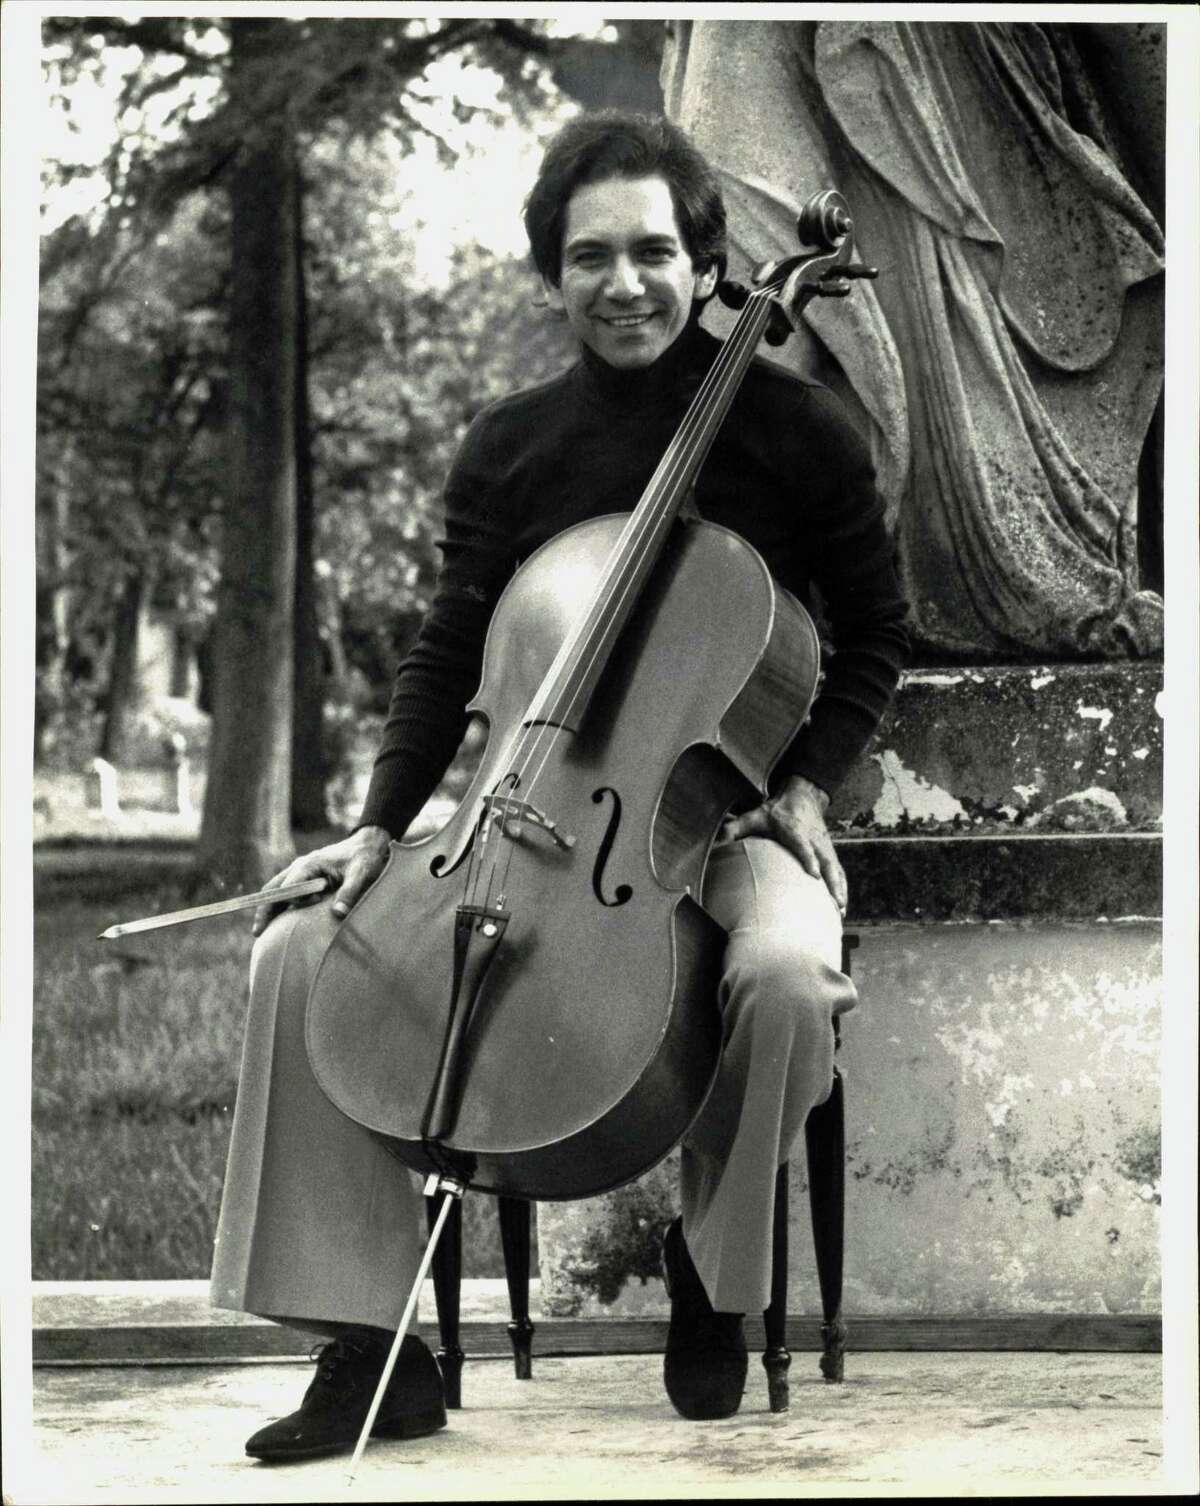 Gilberto Munguia was an affiliate artist at Trinity University in 1977; this photo appeared in the San Antonio Express, Feb. 5, 1977, with a story on his upcoming concerts.